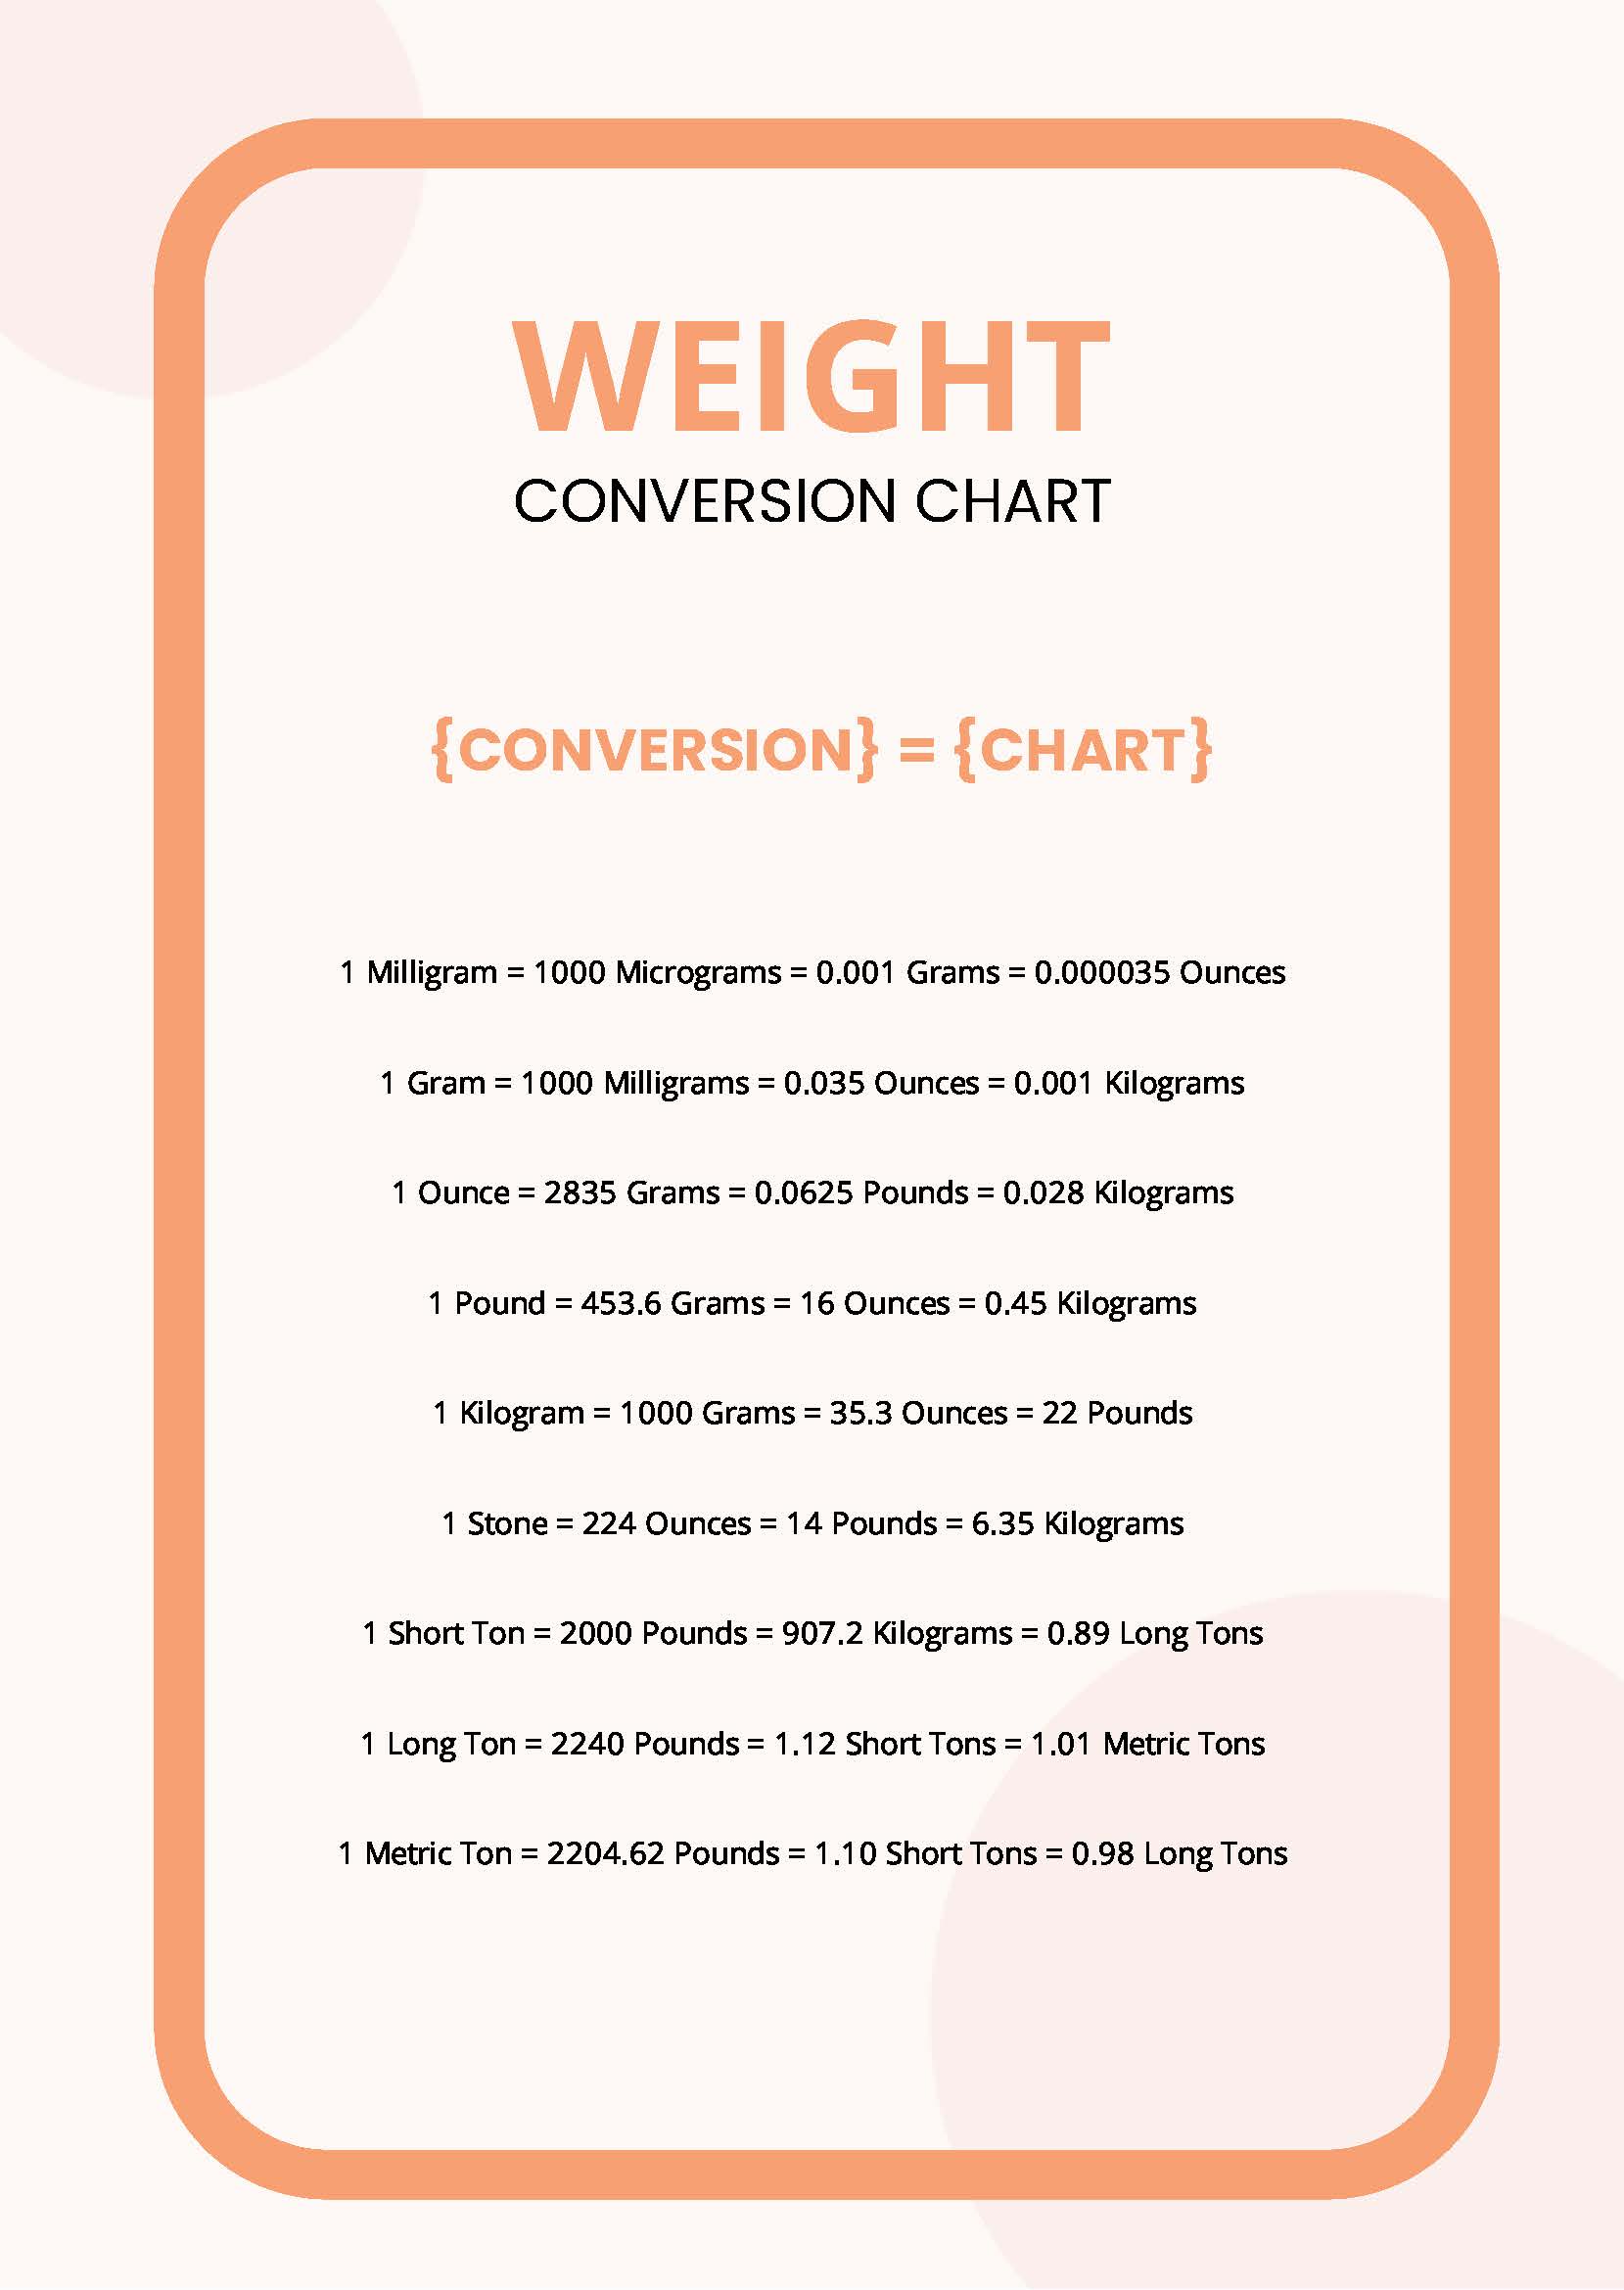 Weight Conversion Chart in PDF